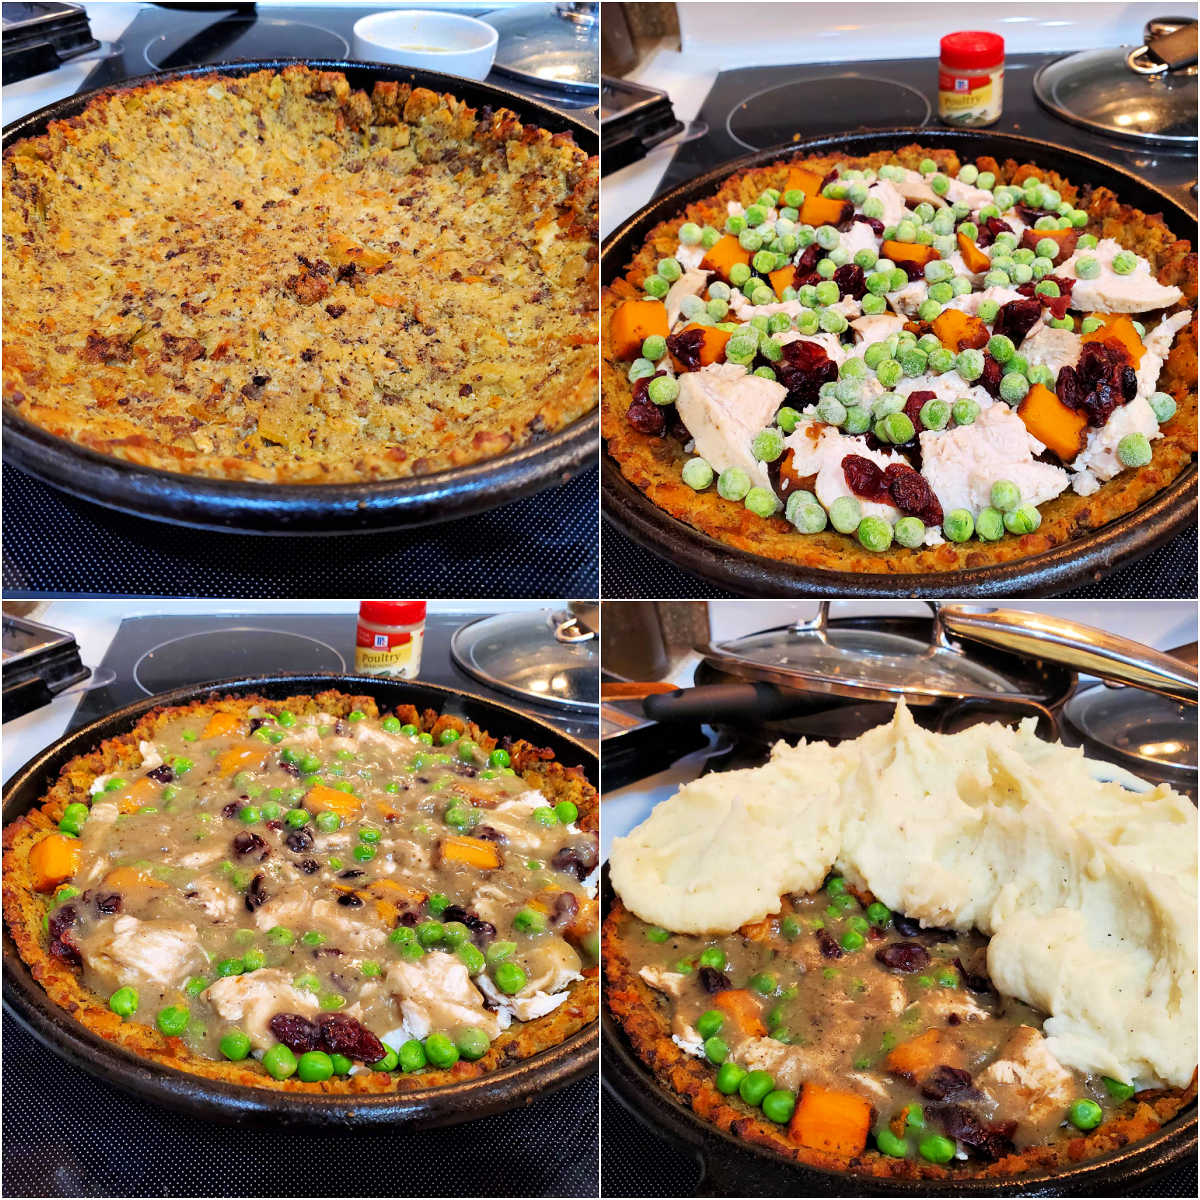 A collage of 4 images. One shows stuffing baked as a crust in a cast iron skillet. The next has sliced turkey, diced sweet potatoes, peas, and Craisins layered in. The third photo shows gravy poured over all the filling ingredients, and the last shows big blobs of mashed potato spooned on top to make shepherd's pie.